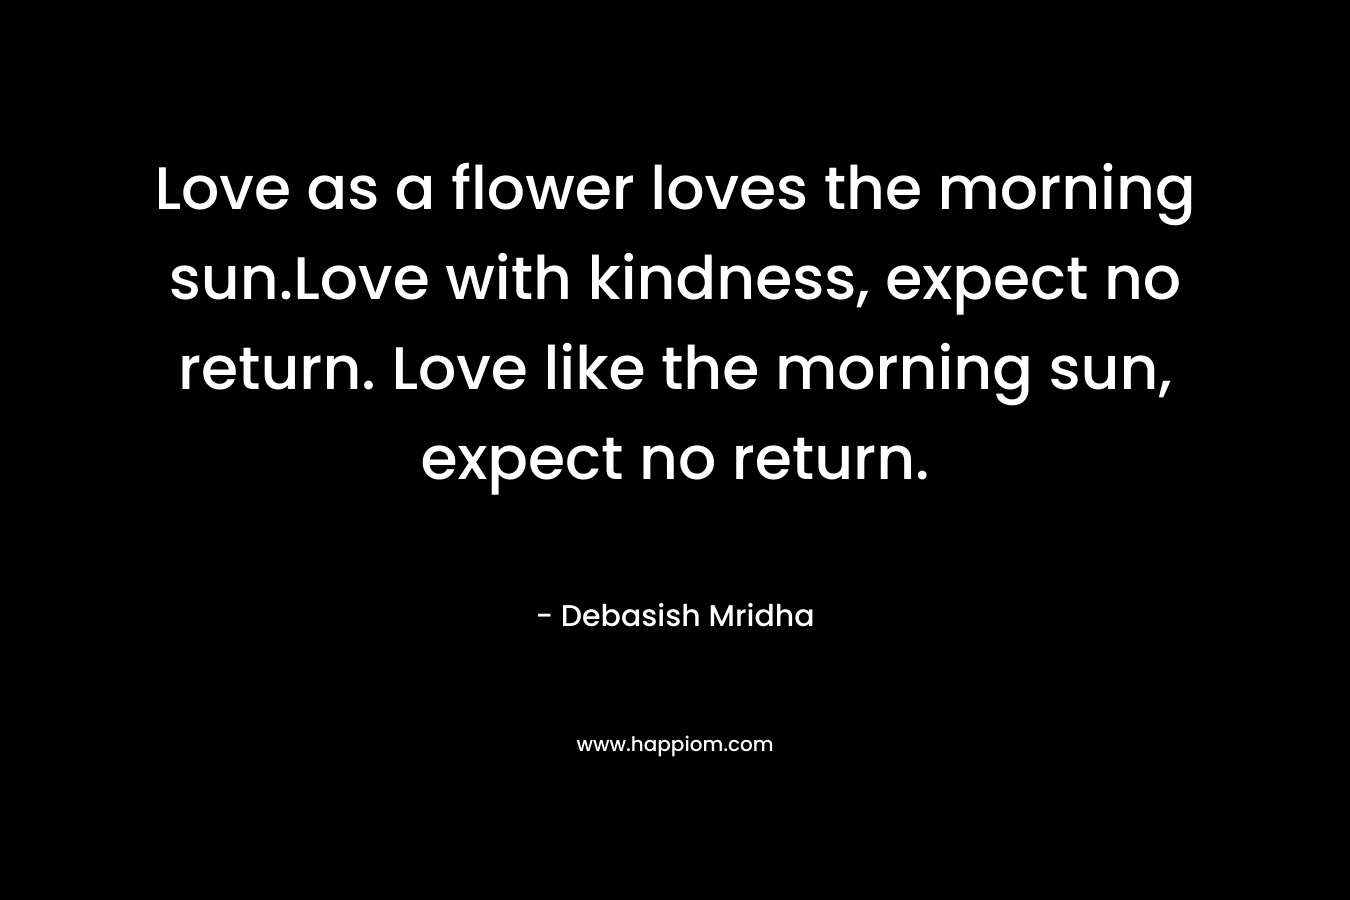 Love as a flower loves the morning sun.Love with kindness, expect no return. Love like the morning sun, expect no return.